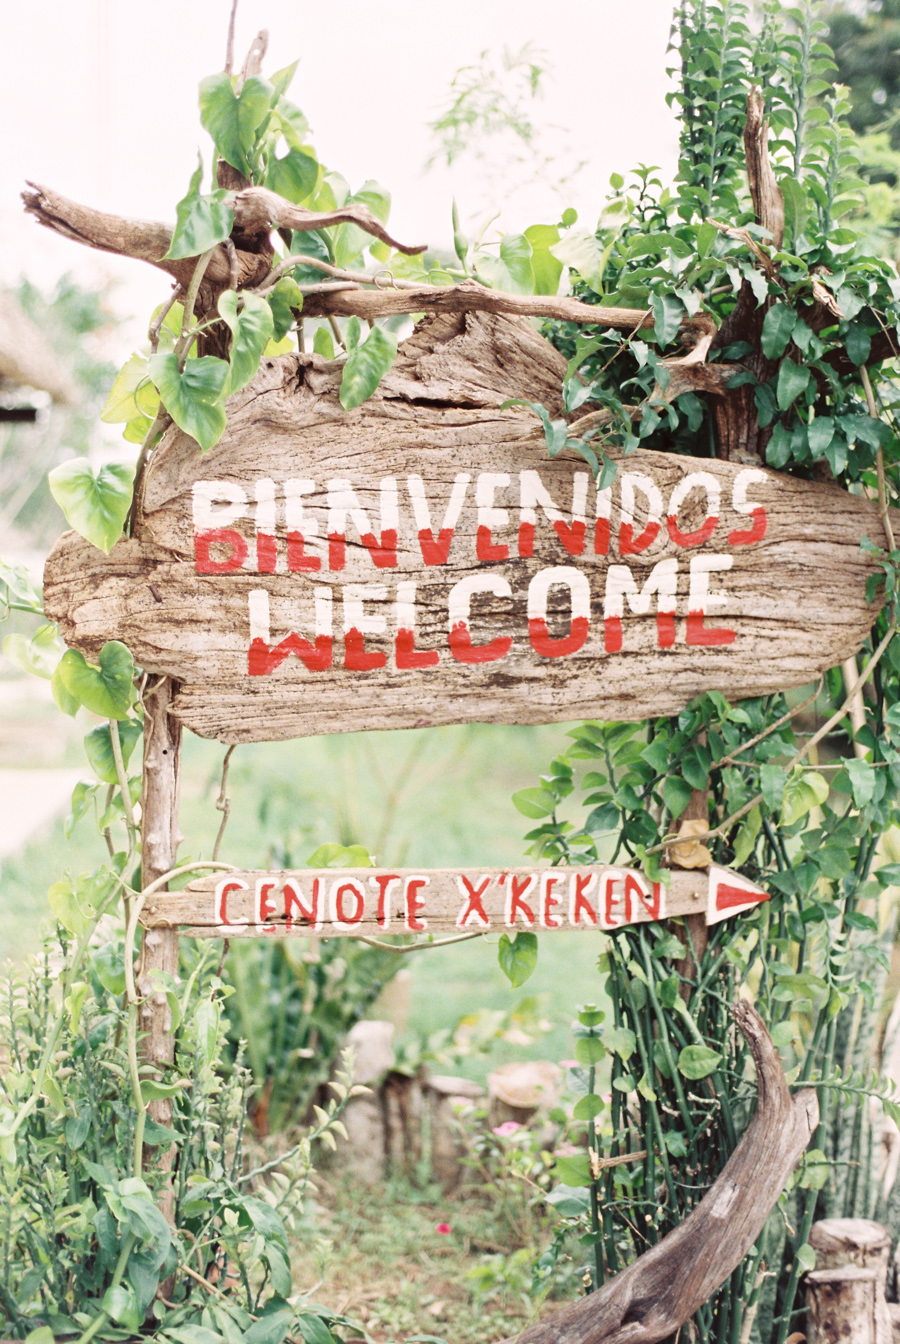 Welcome Sign at Cenote Xkeken